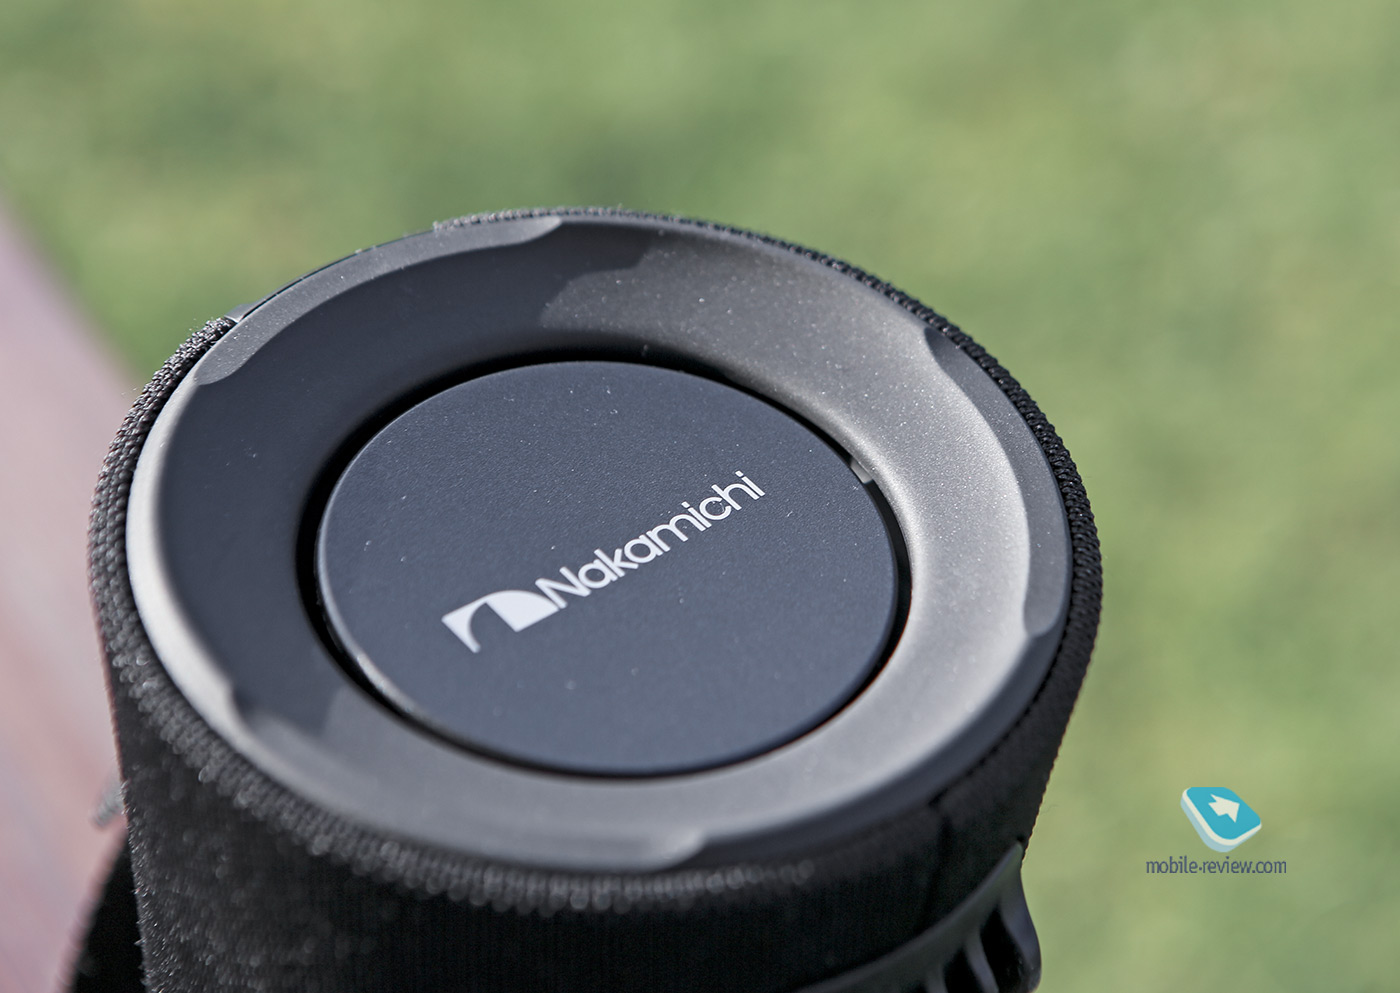 Review of the wireless speaker Nakamichi Punch